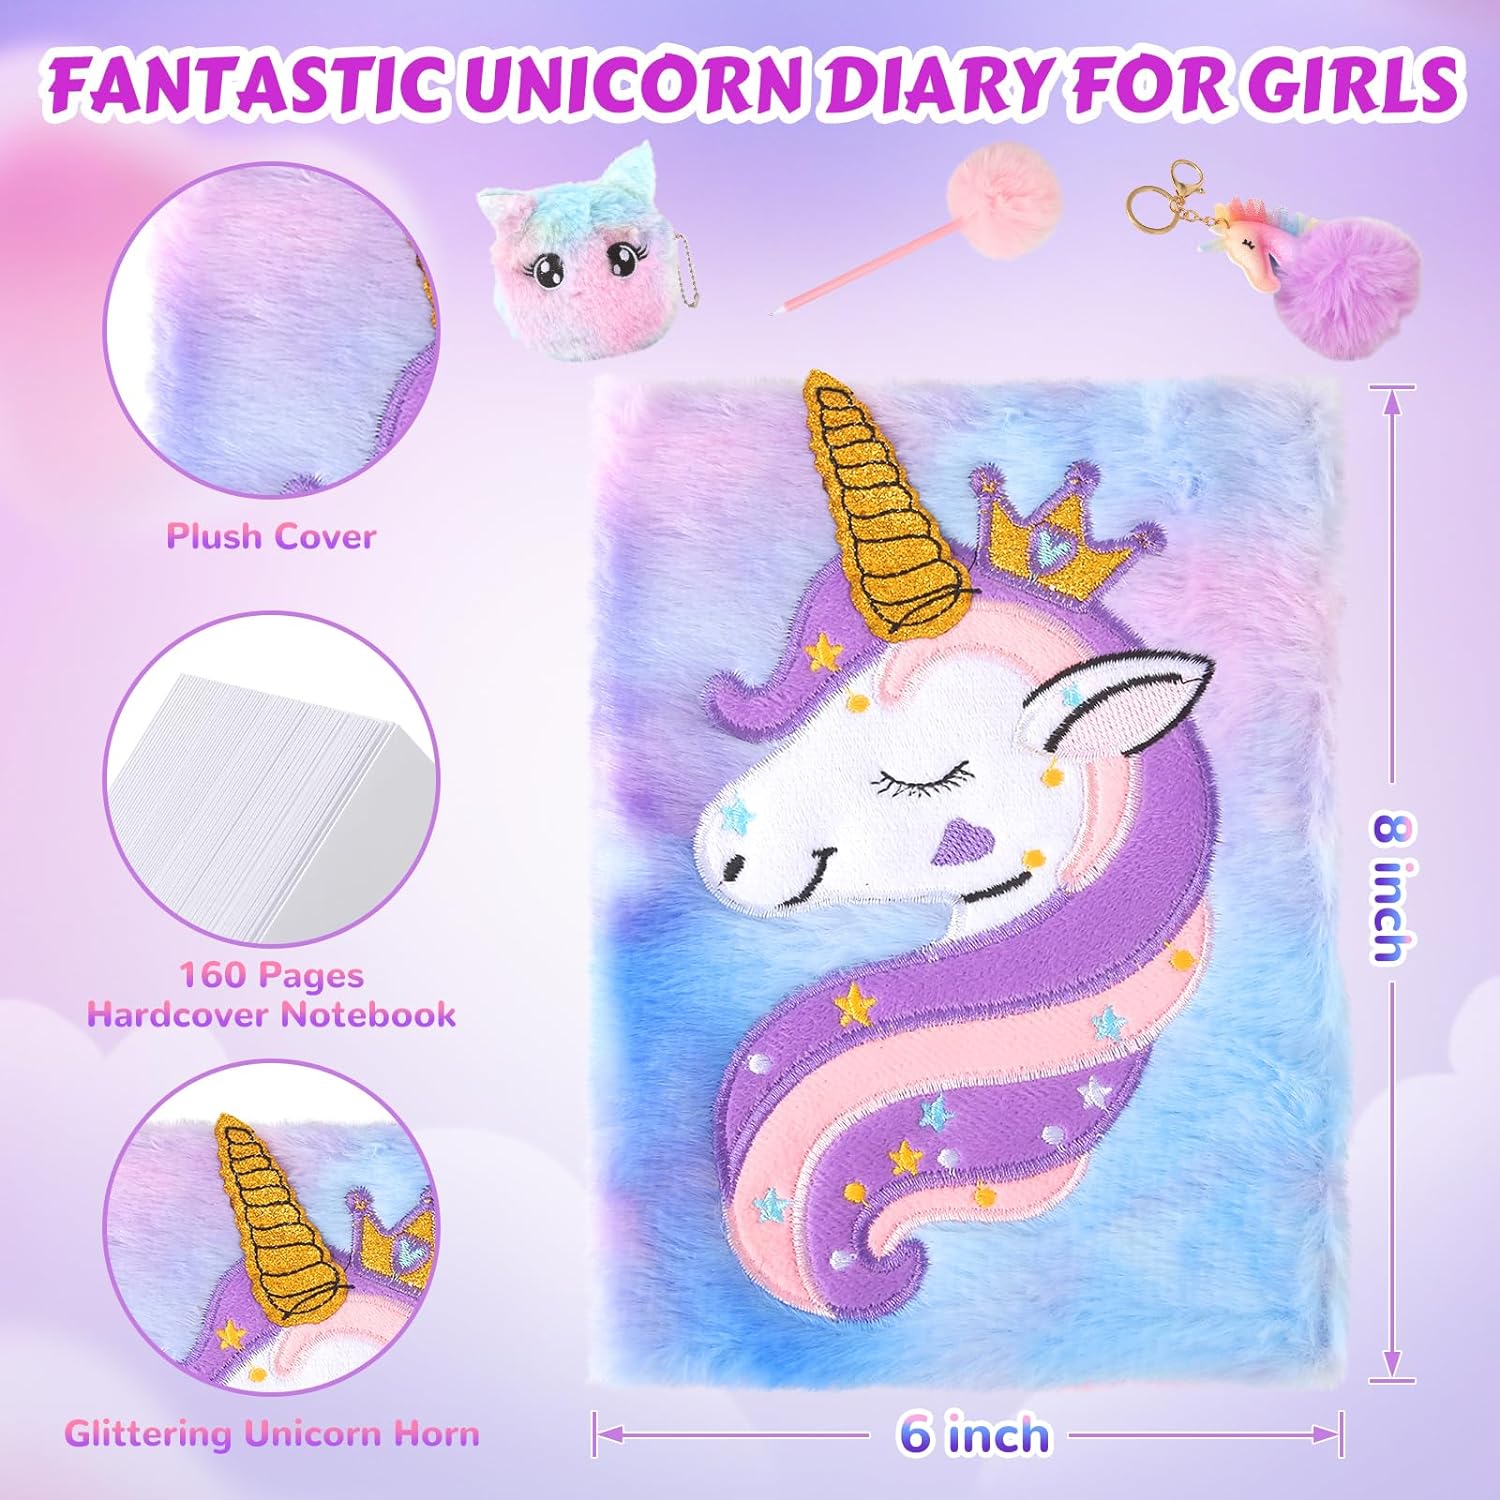 Unicorns Gifts for Girls 5 6 7 8 9 10+ Years Old, Kids Unicorn Toys with Light Up Plush Star Pillow/ Diary/ Headband/ Eye Mask/ Water Bottle, Soft Plush Toys Set for Teens Birthday Gifts Christmas